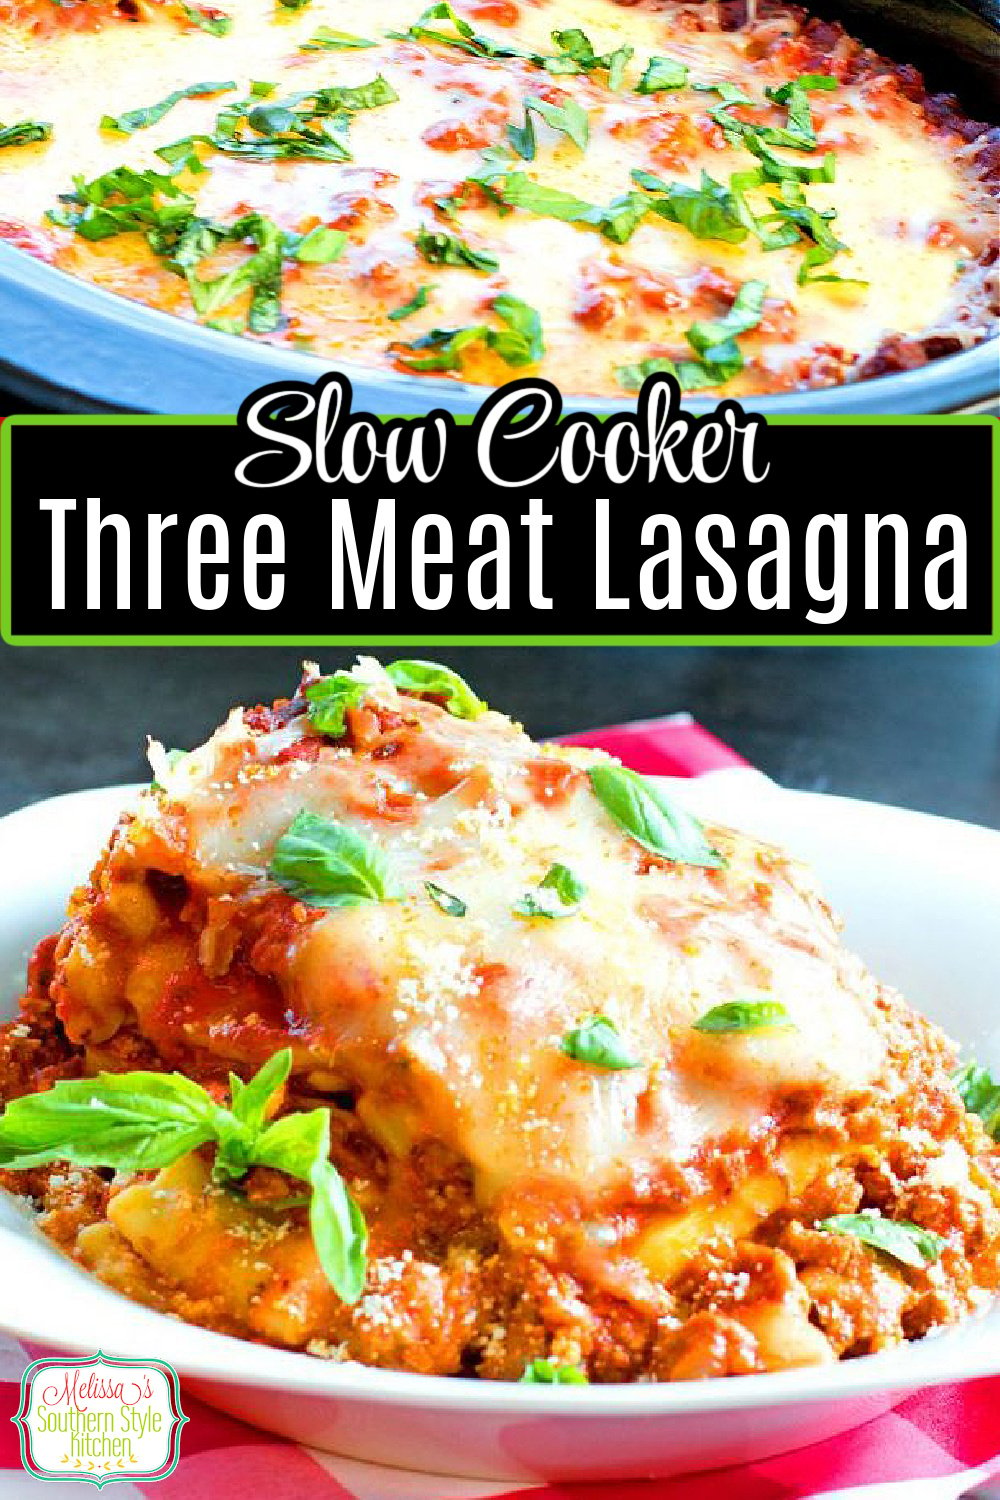 Simmer this rich and flavorful lasagna in your slow cooker all day long and enjoy Italian night at home #lasagna #crockpotlasagna #slowcookerrecipes #threemeatlasagna #pasta #dinnerideas #southernfood #southernrecipes #melissassouthernstylekitchen via @melissasssk